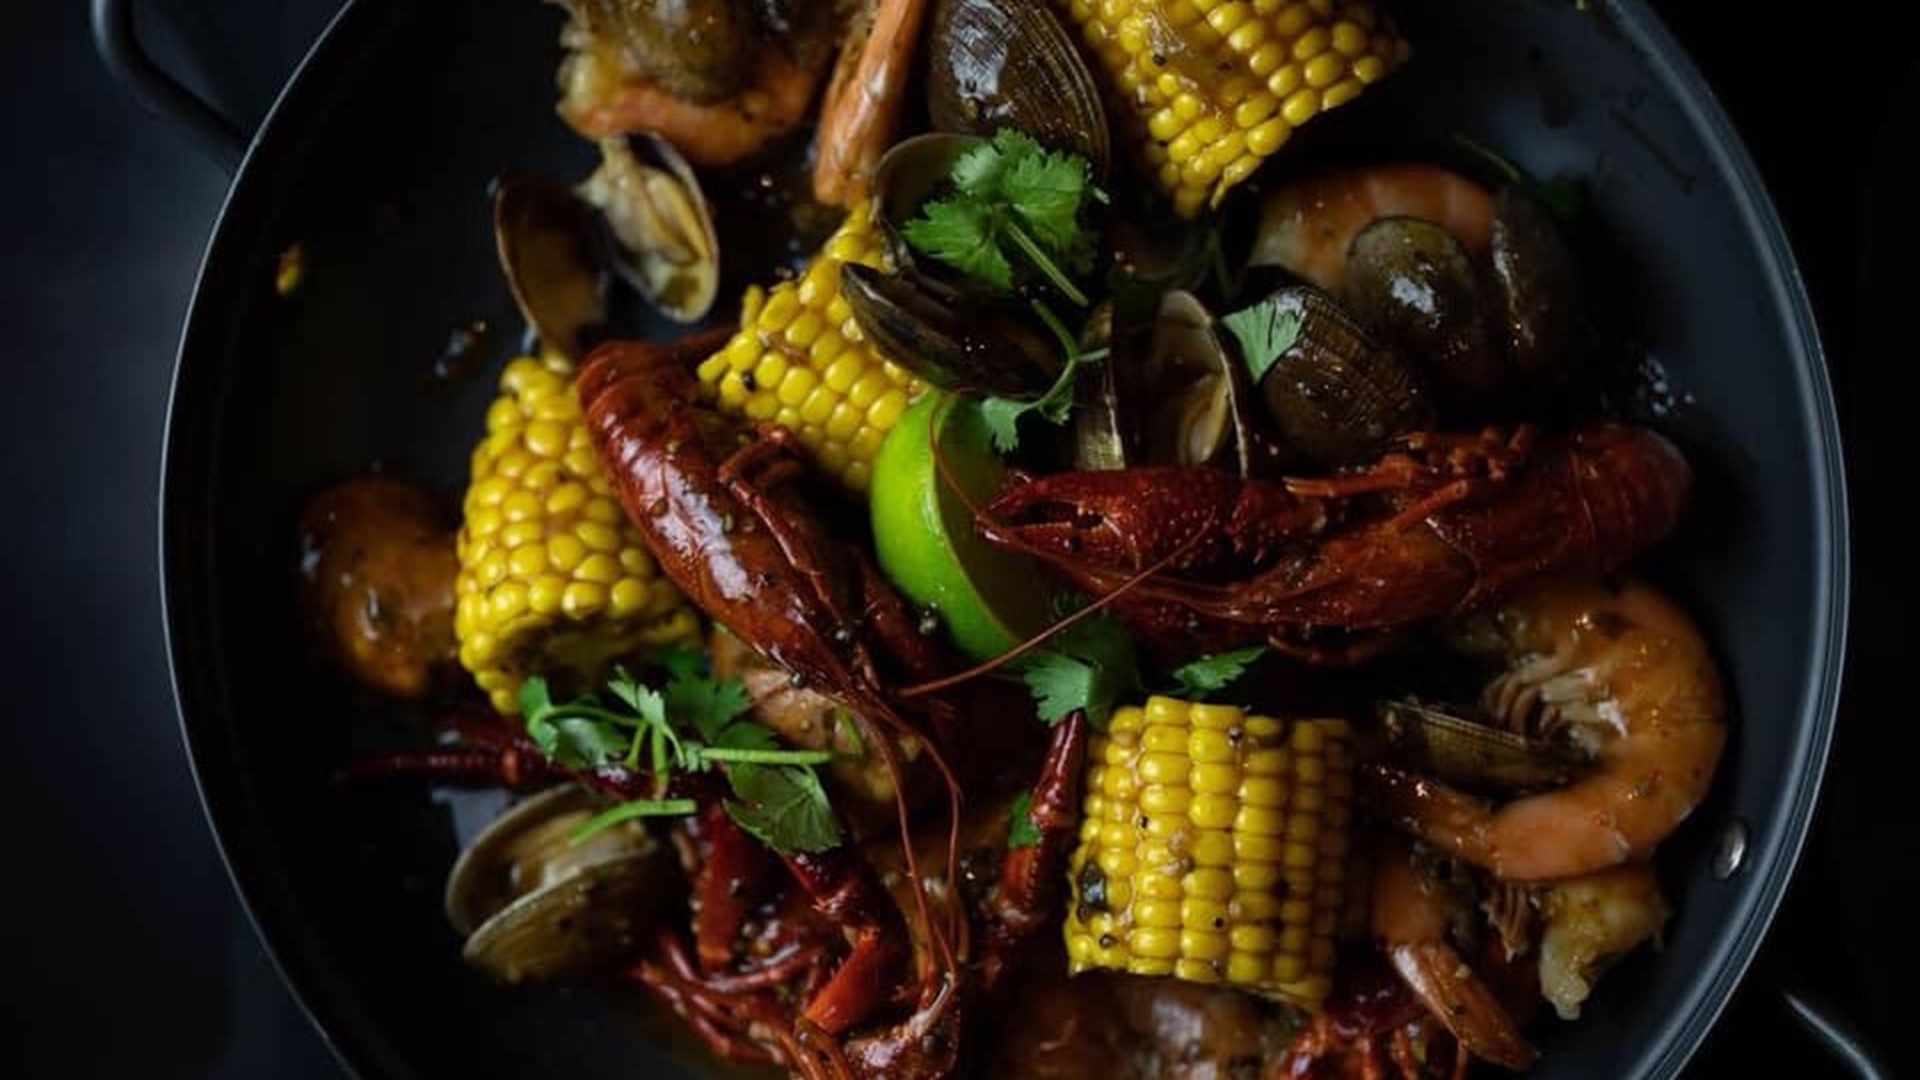 Learn how to make a how to make "Crawfish Boil with Sausage and Asian Cajun seasonings" from Issaquah's Asian-inspired seafood boil restaurant & raw oyster bar.